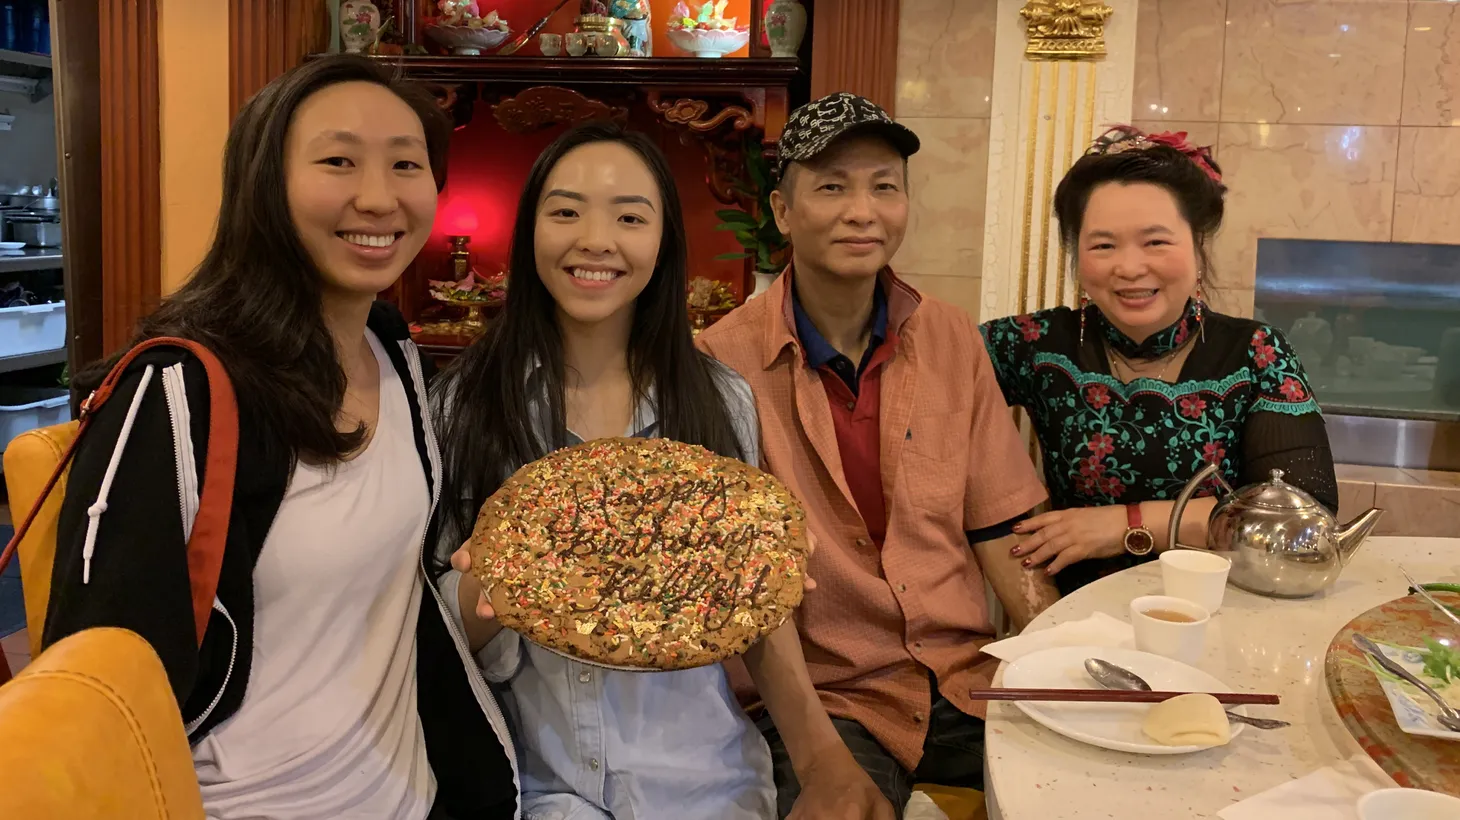 Yening “Lupe” Liang, seen here with his daughters and wife Judy (right), was the first to put Chinese, English, and Spanish on menus in LA’s Chinatown.